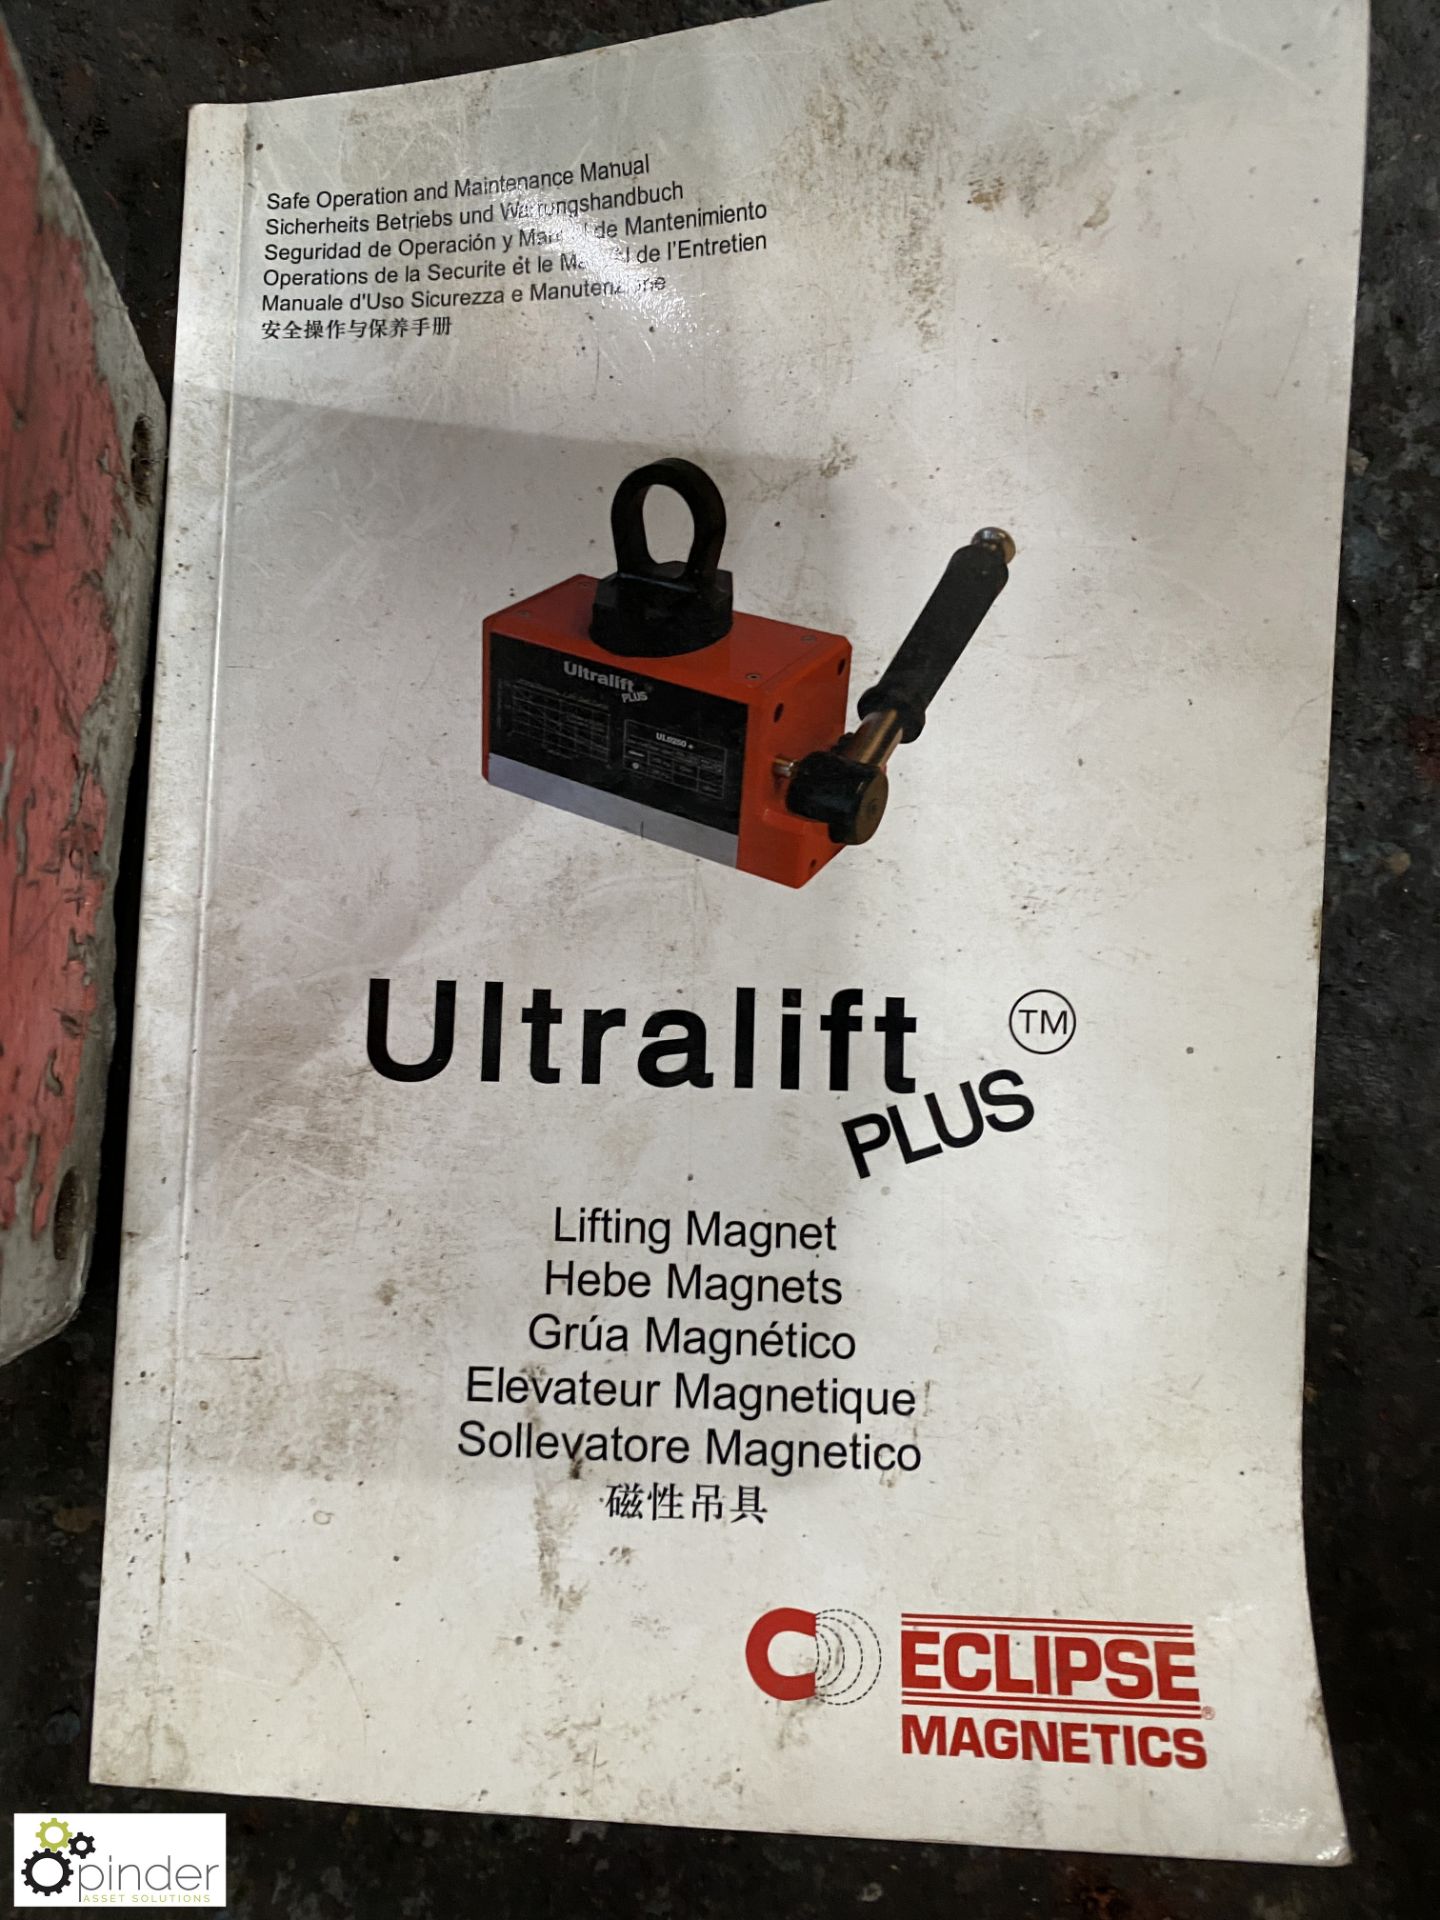 Eclipse Ultralift 500+ Plus Lifting Magnet, 500kg - Image 4 of 5